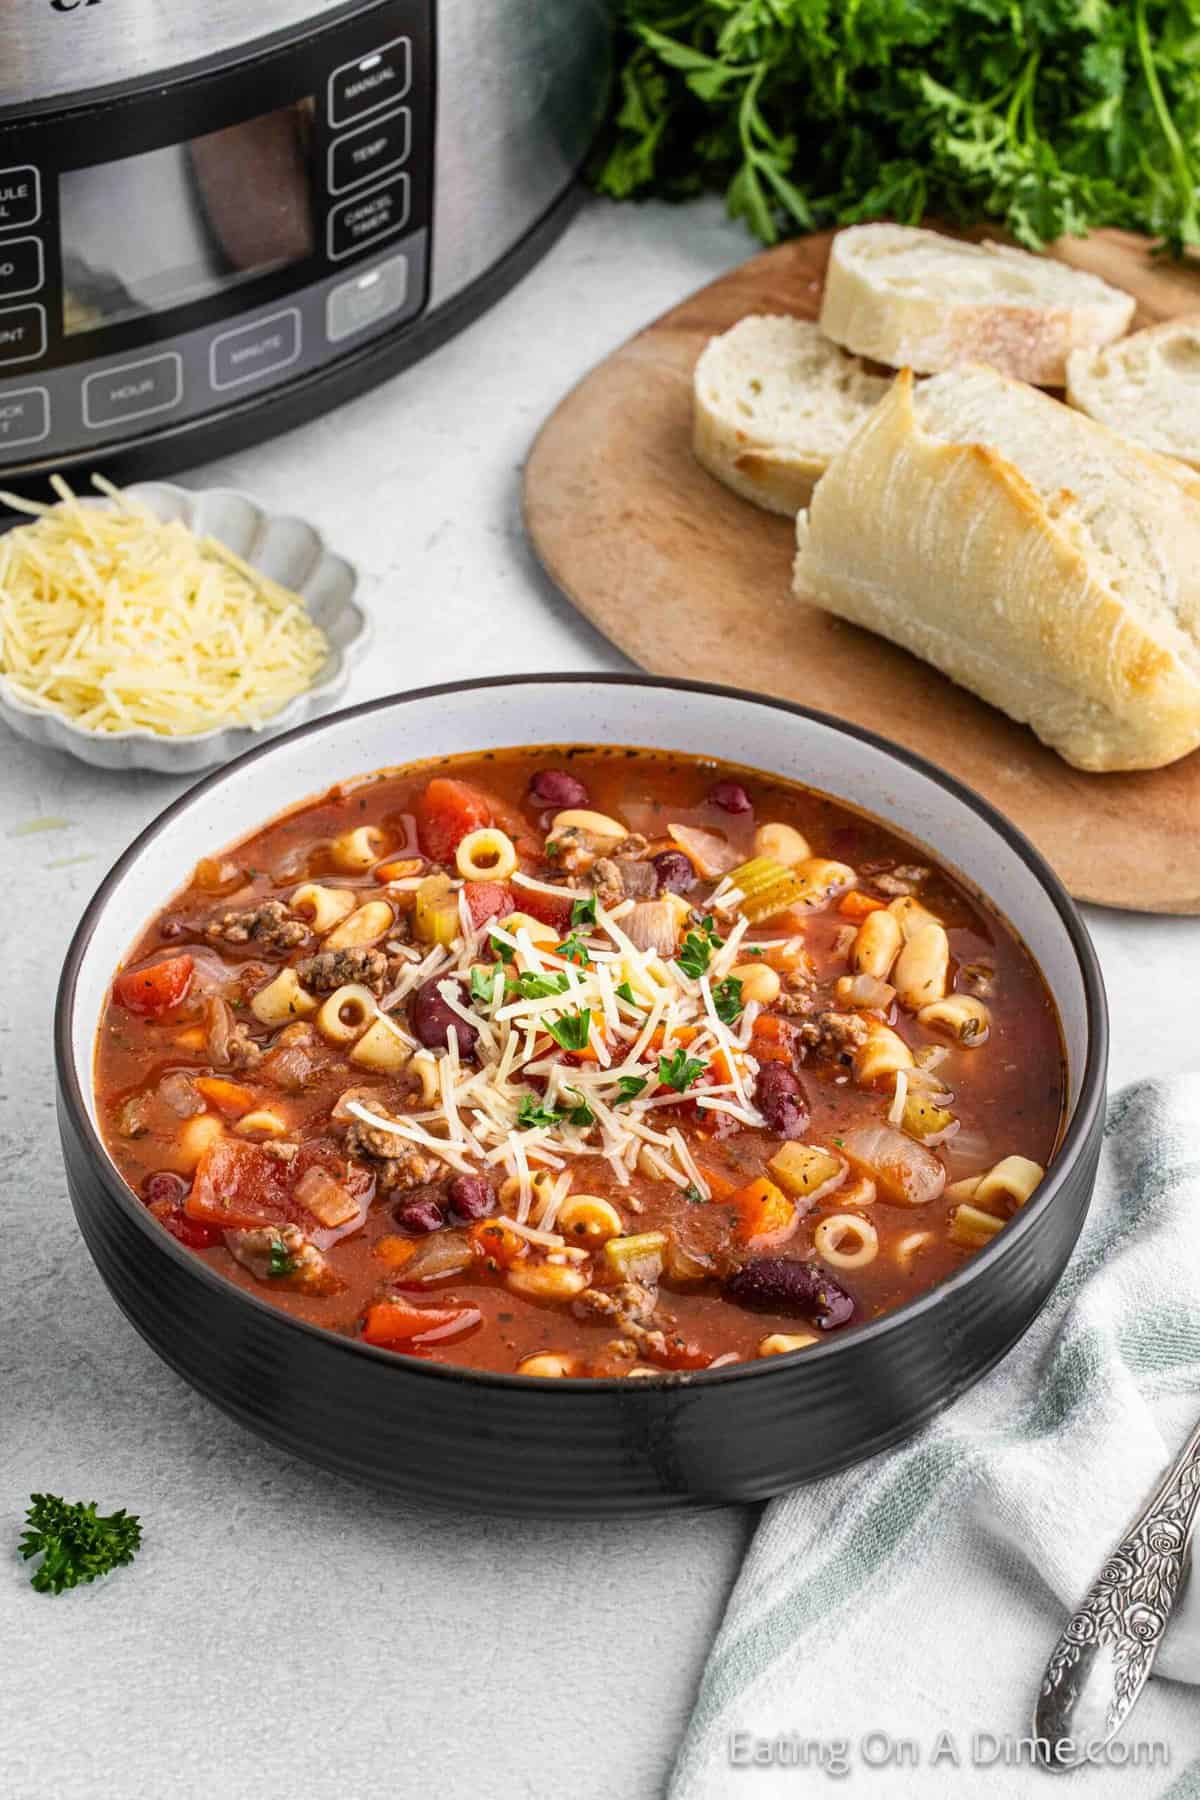 Pasta Fagioli in a bowl topped with shredded parmesan cheese and french bread on the background